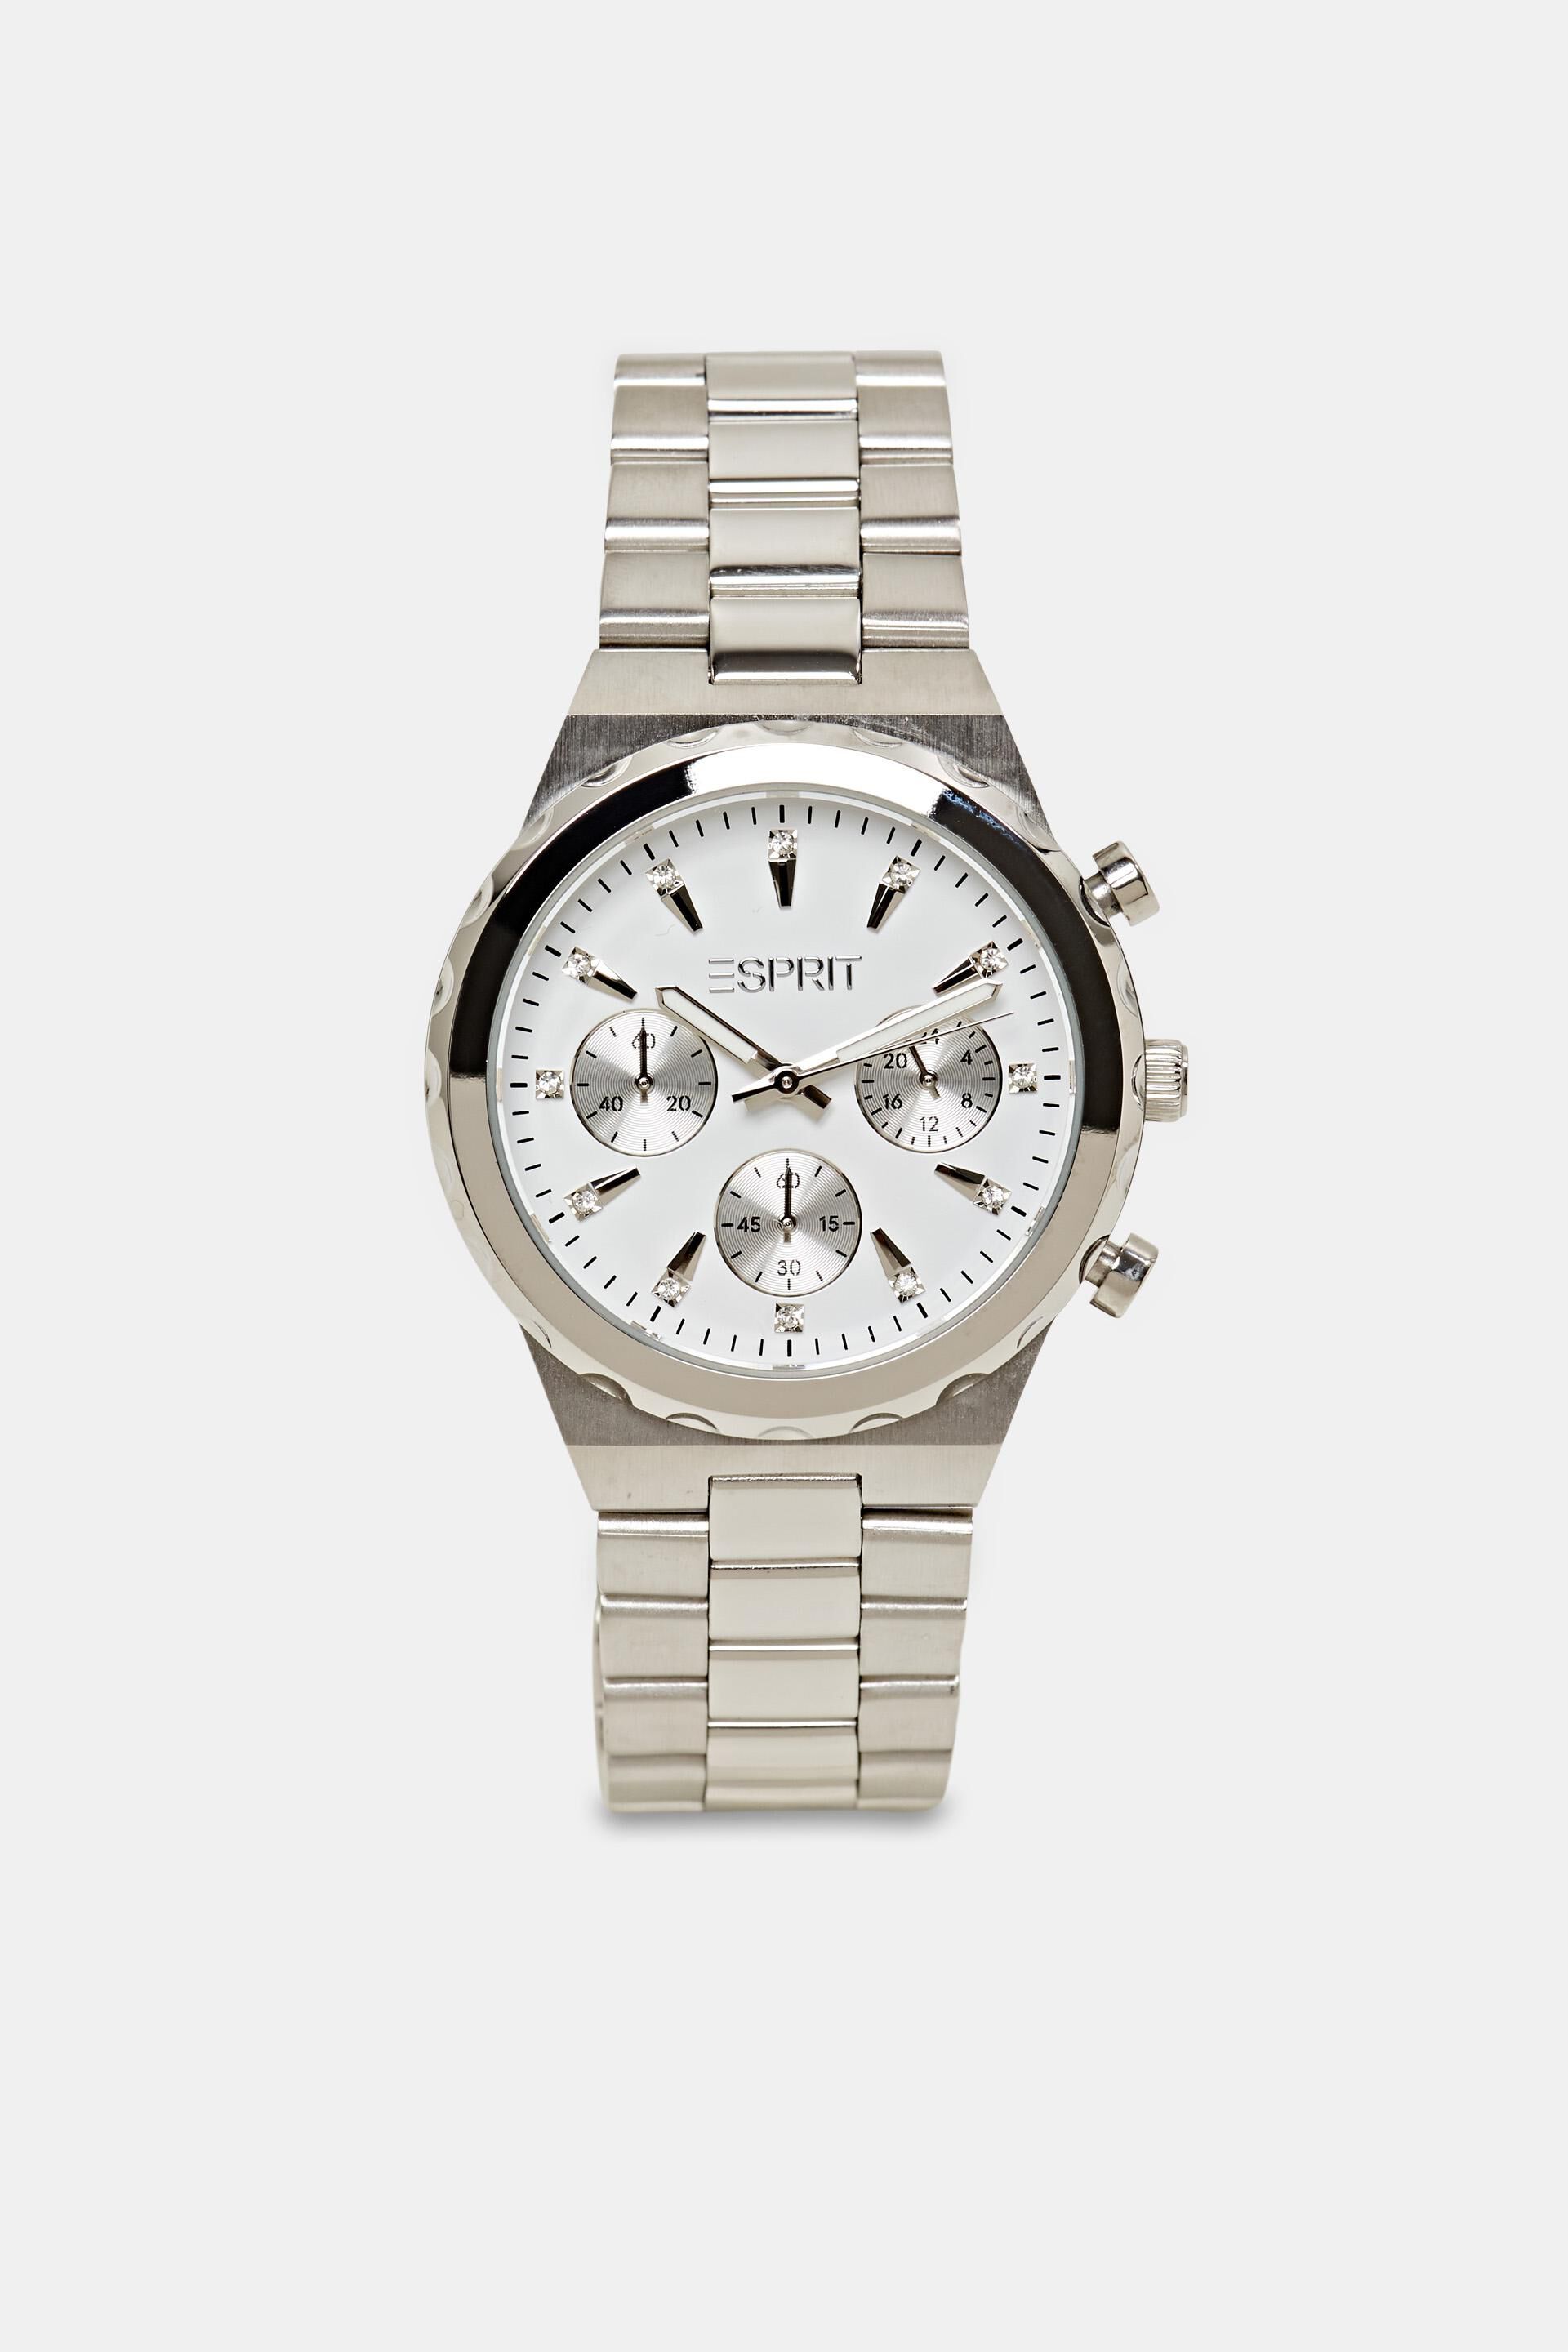 Esprit with Stainless-steel a chronograph link bracelet